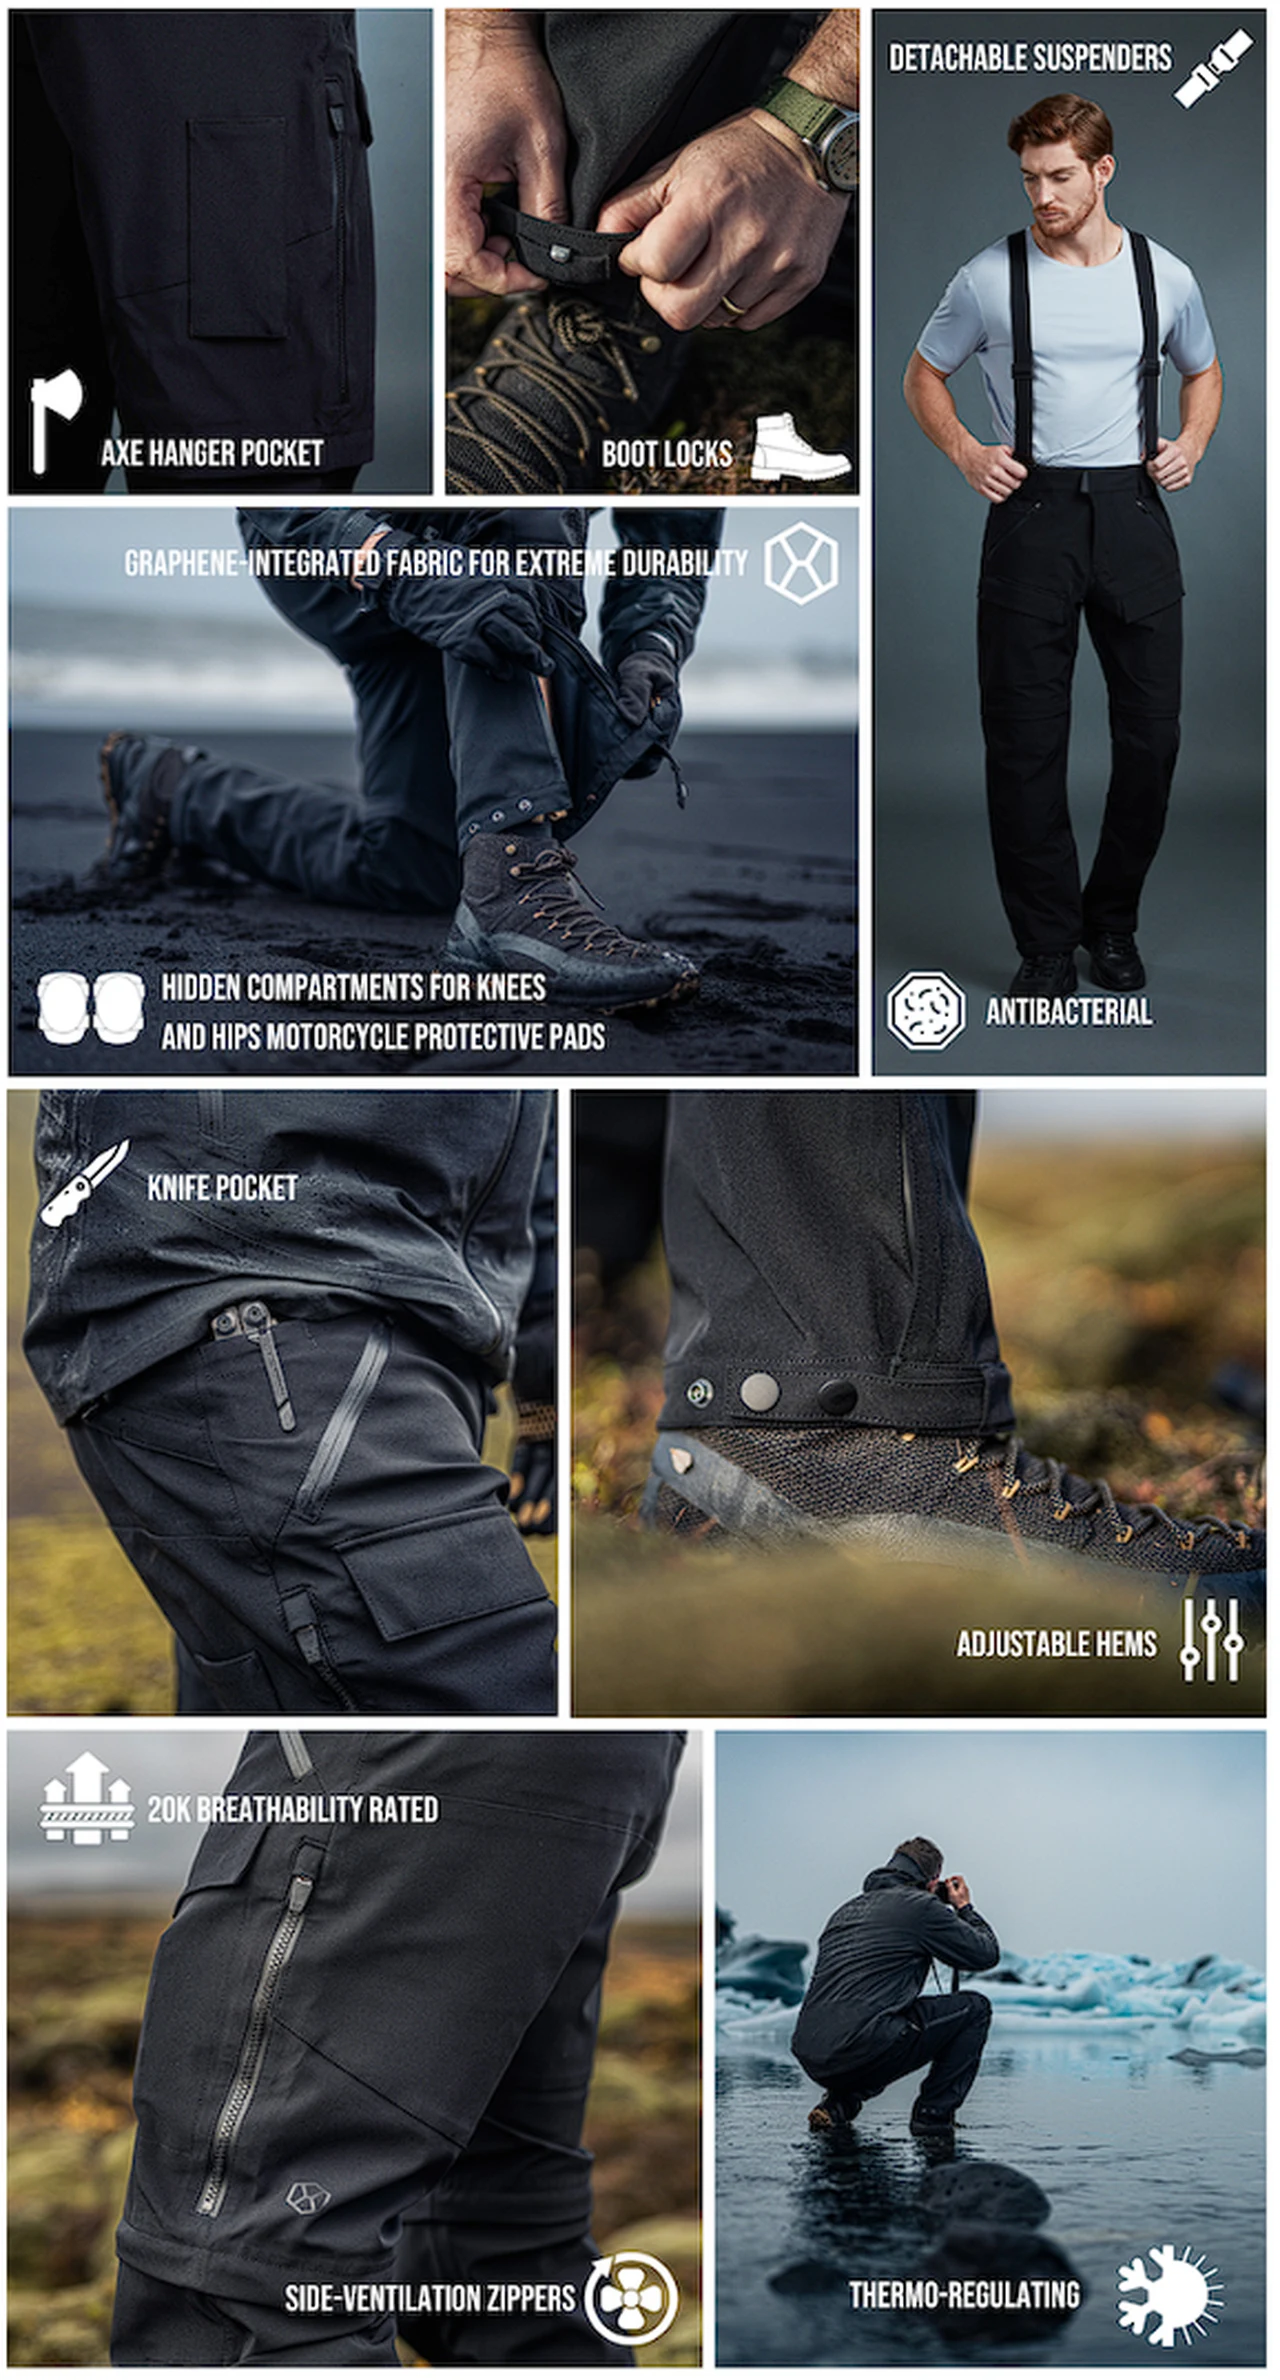 a selection of images showing the features and benefits of wearing rugged outdoor adventure clothes